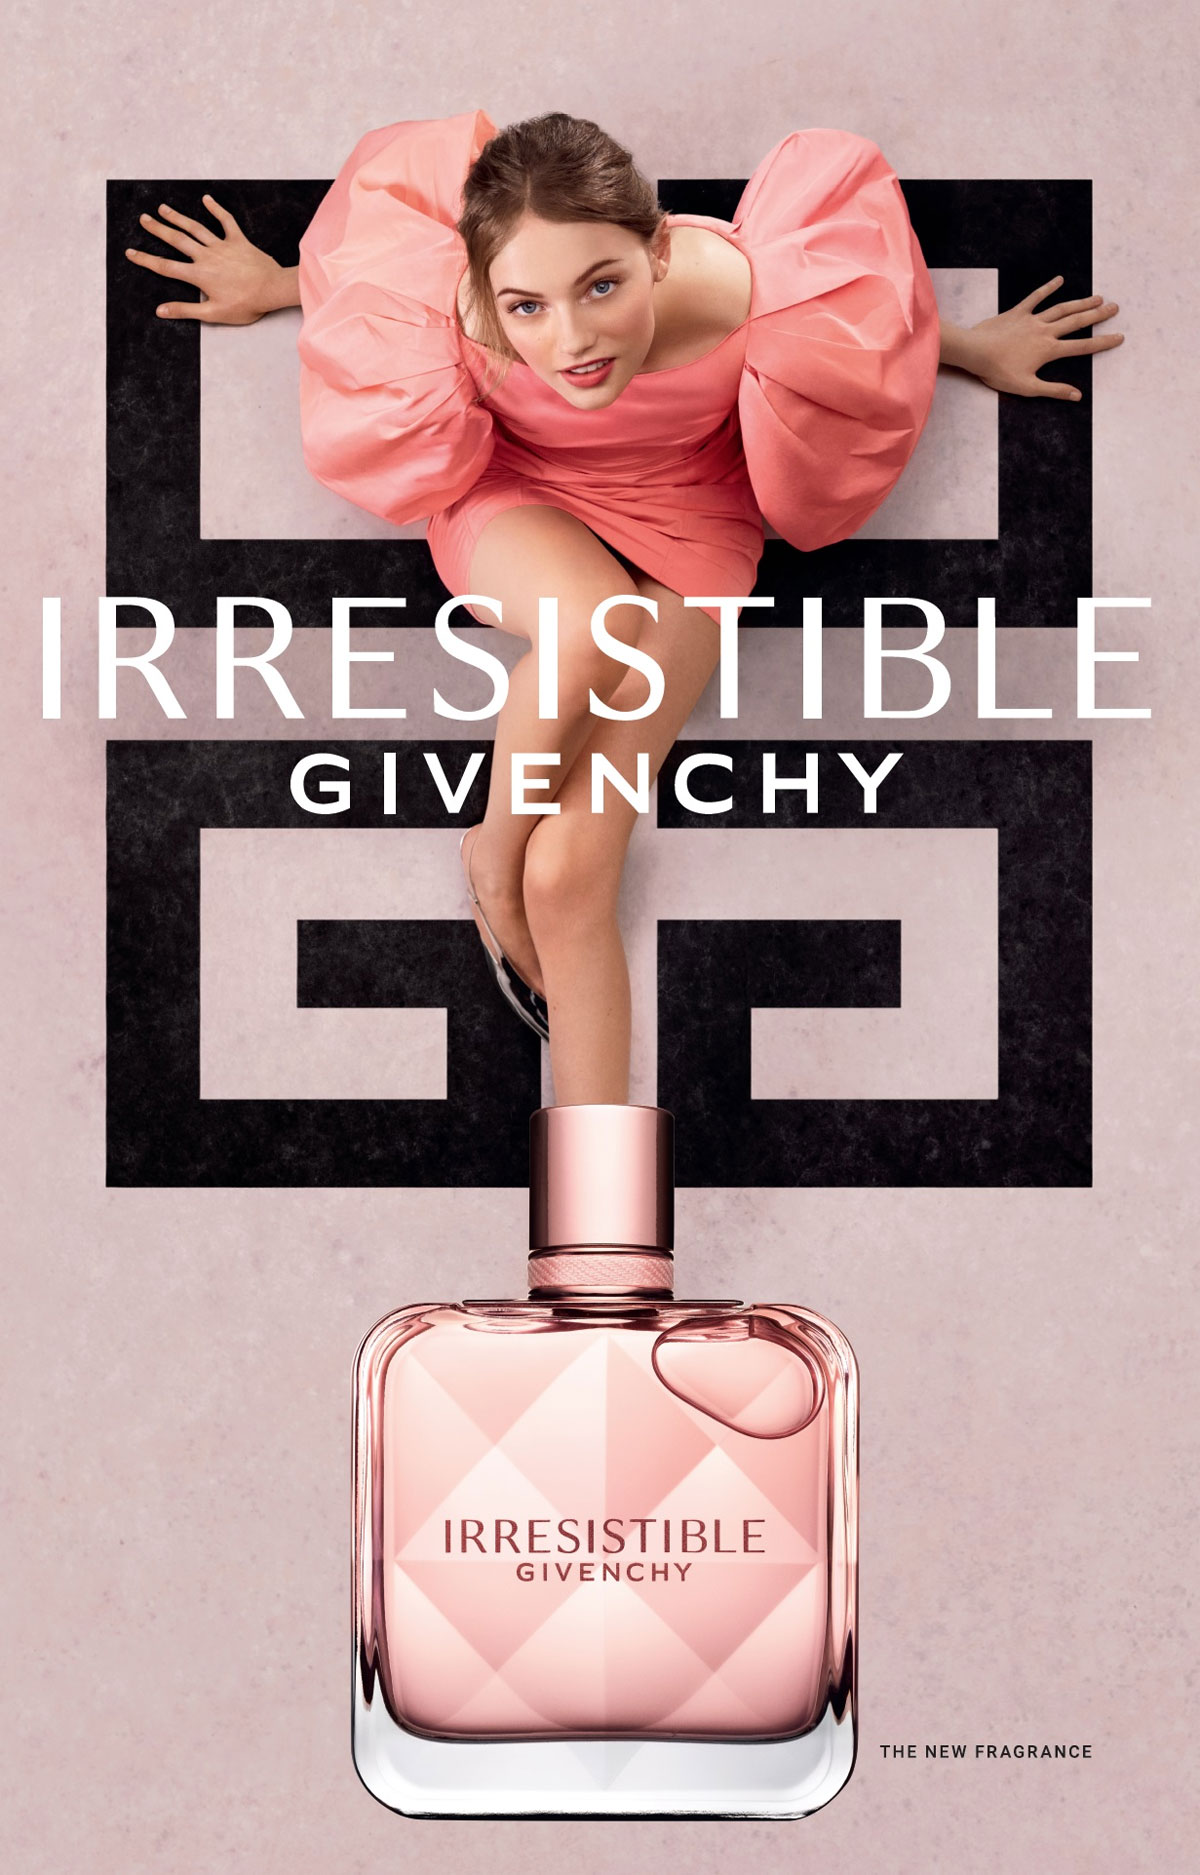 Givenchy Irresistible Givenchy fruity floral perfume guide to scents